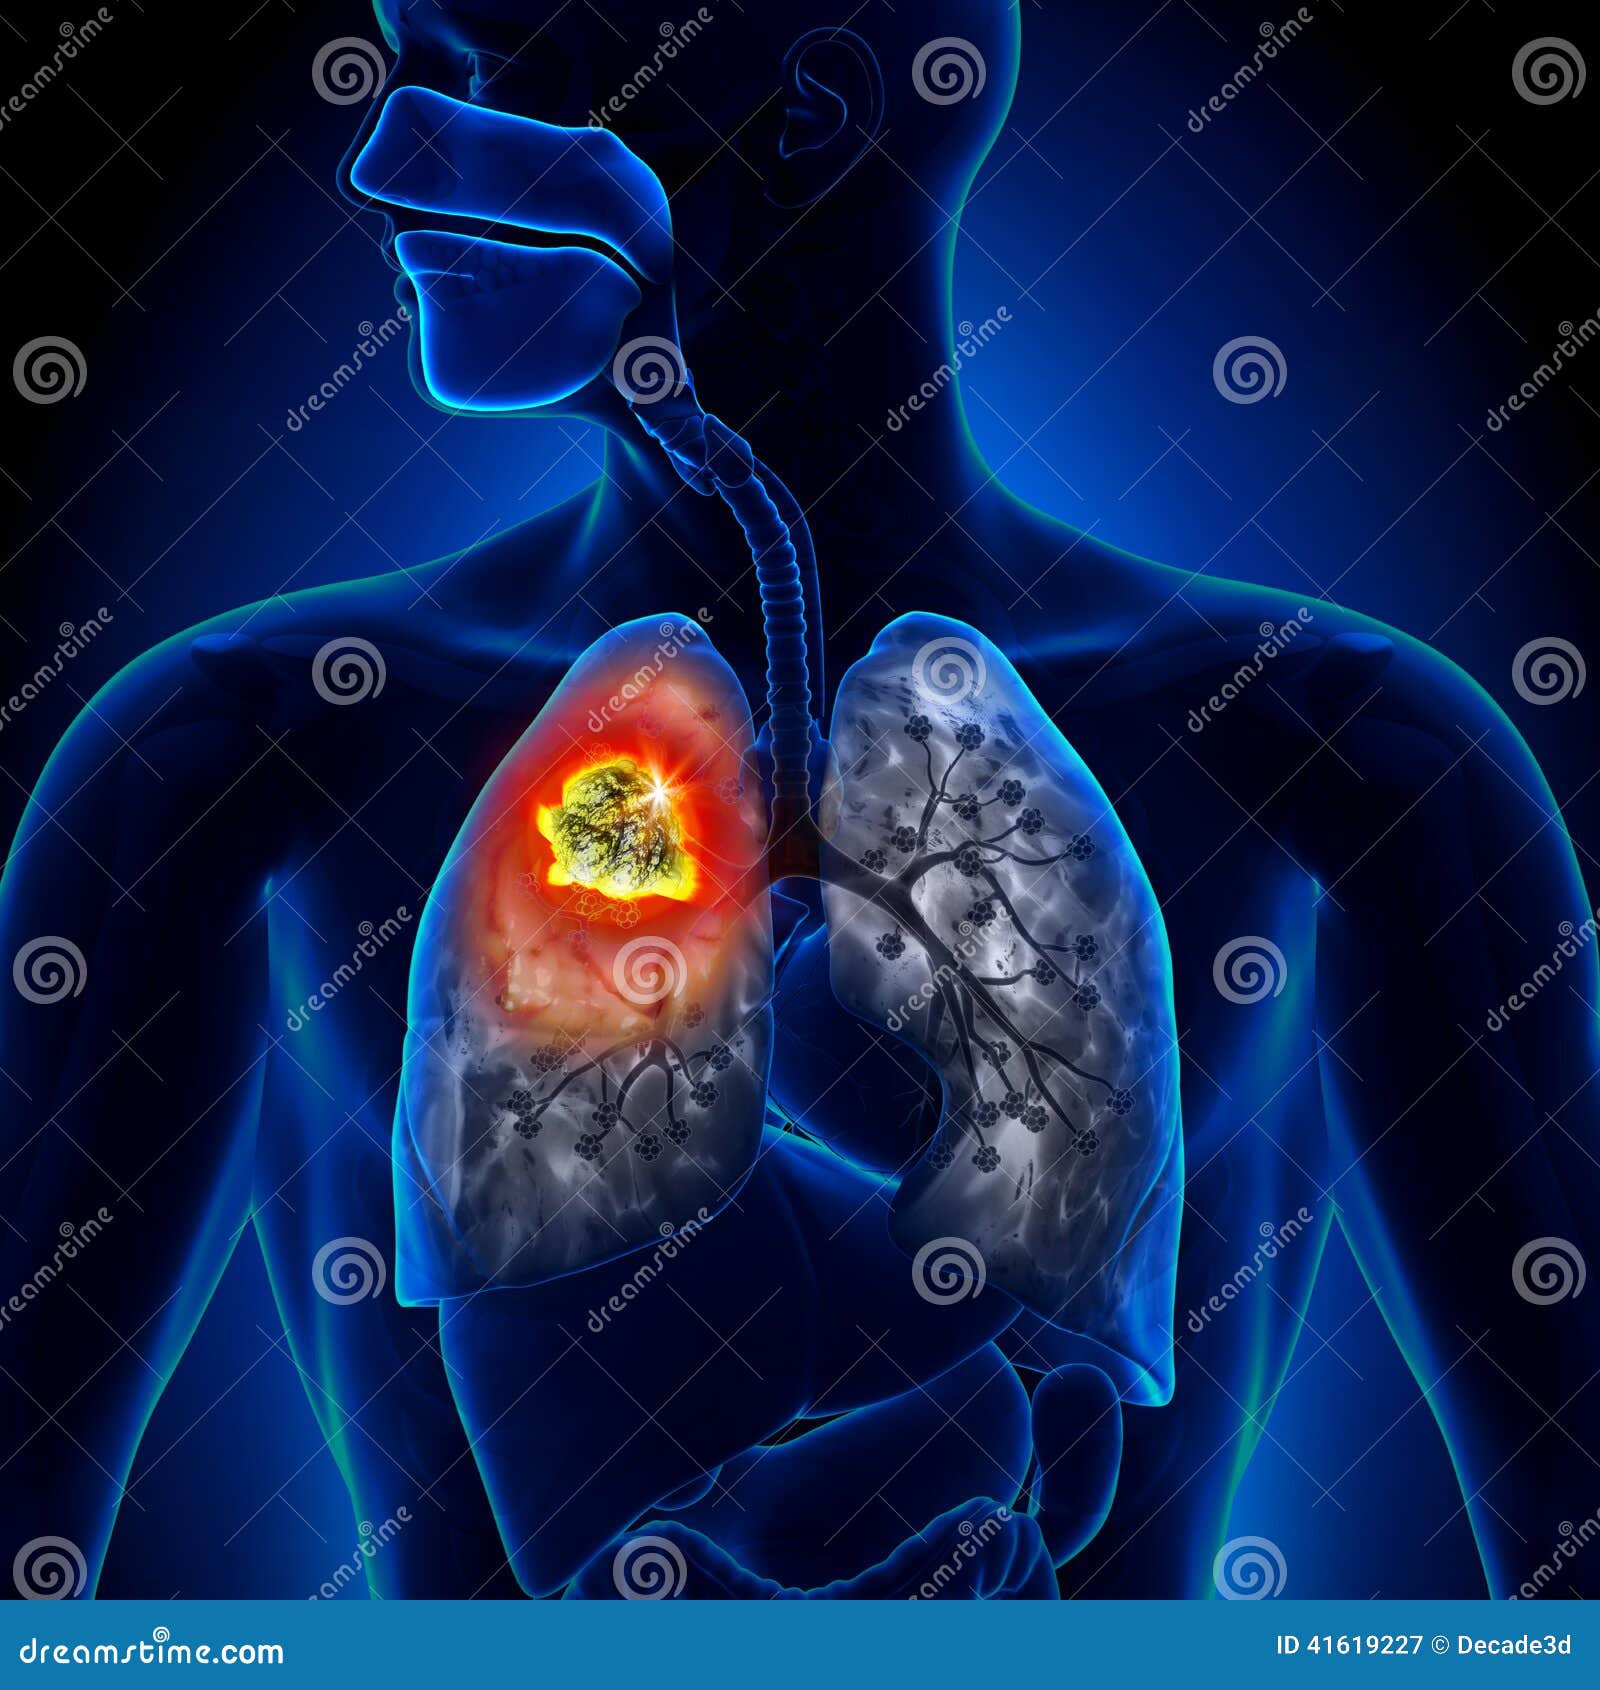 lung cancer - tumor